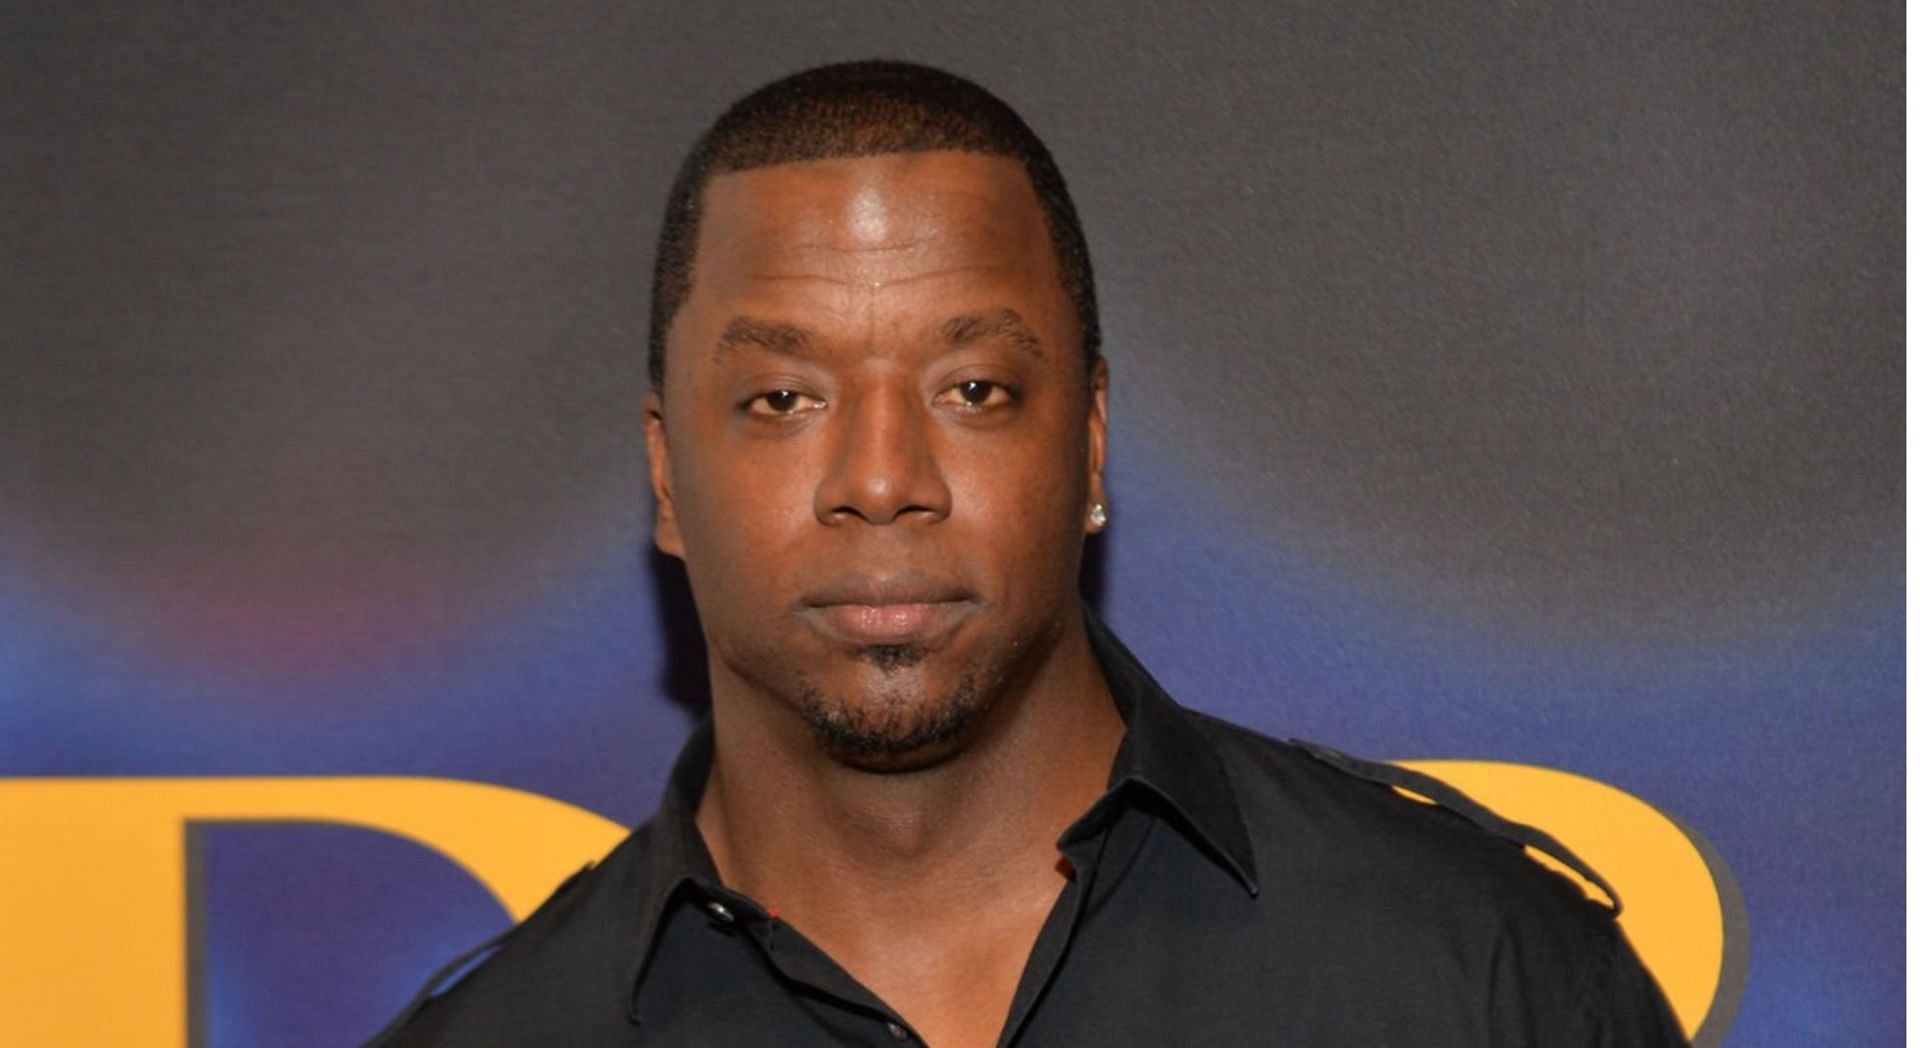 Porsha Williams was previously married to NFL star Kordell Stewart (Image via Getty Images)